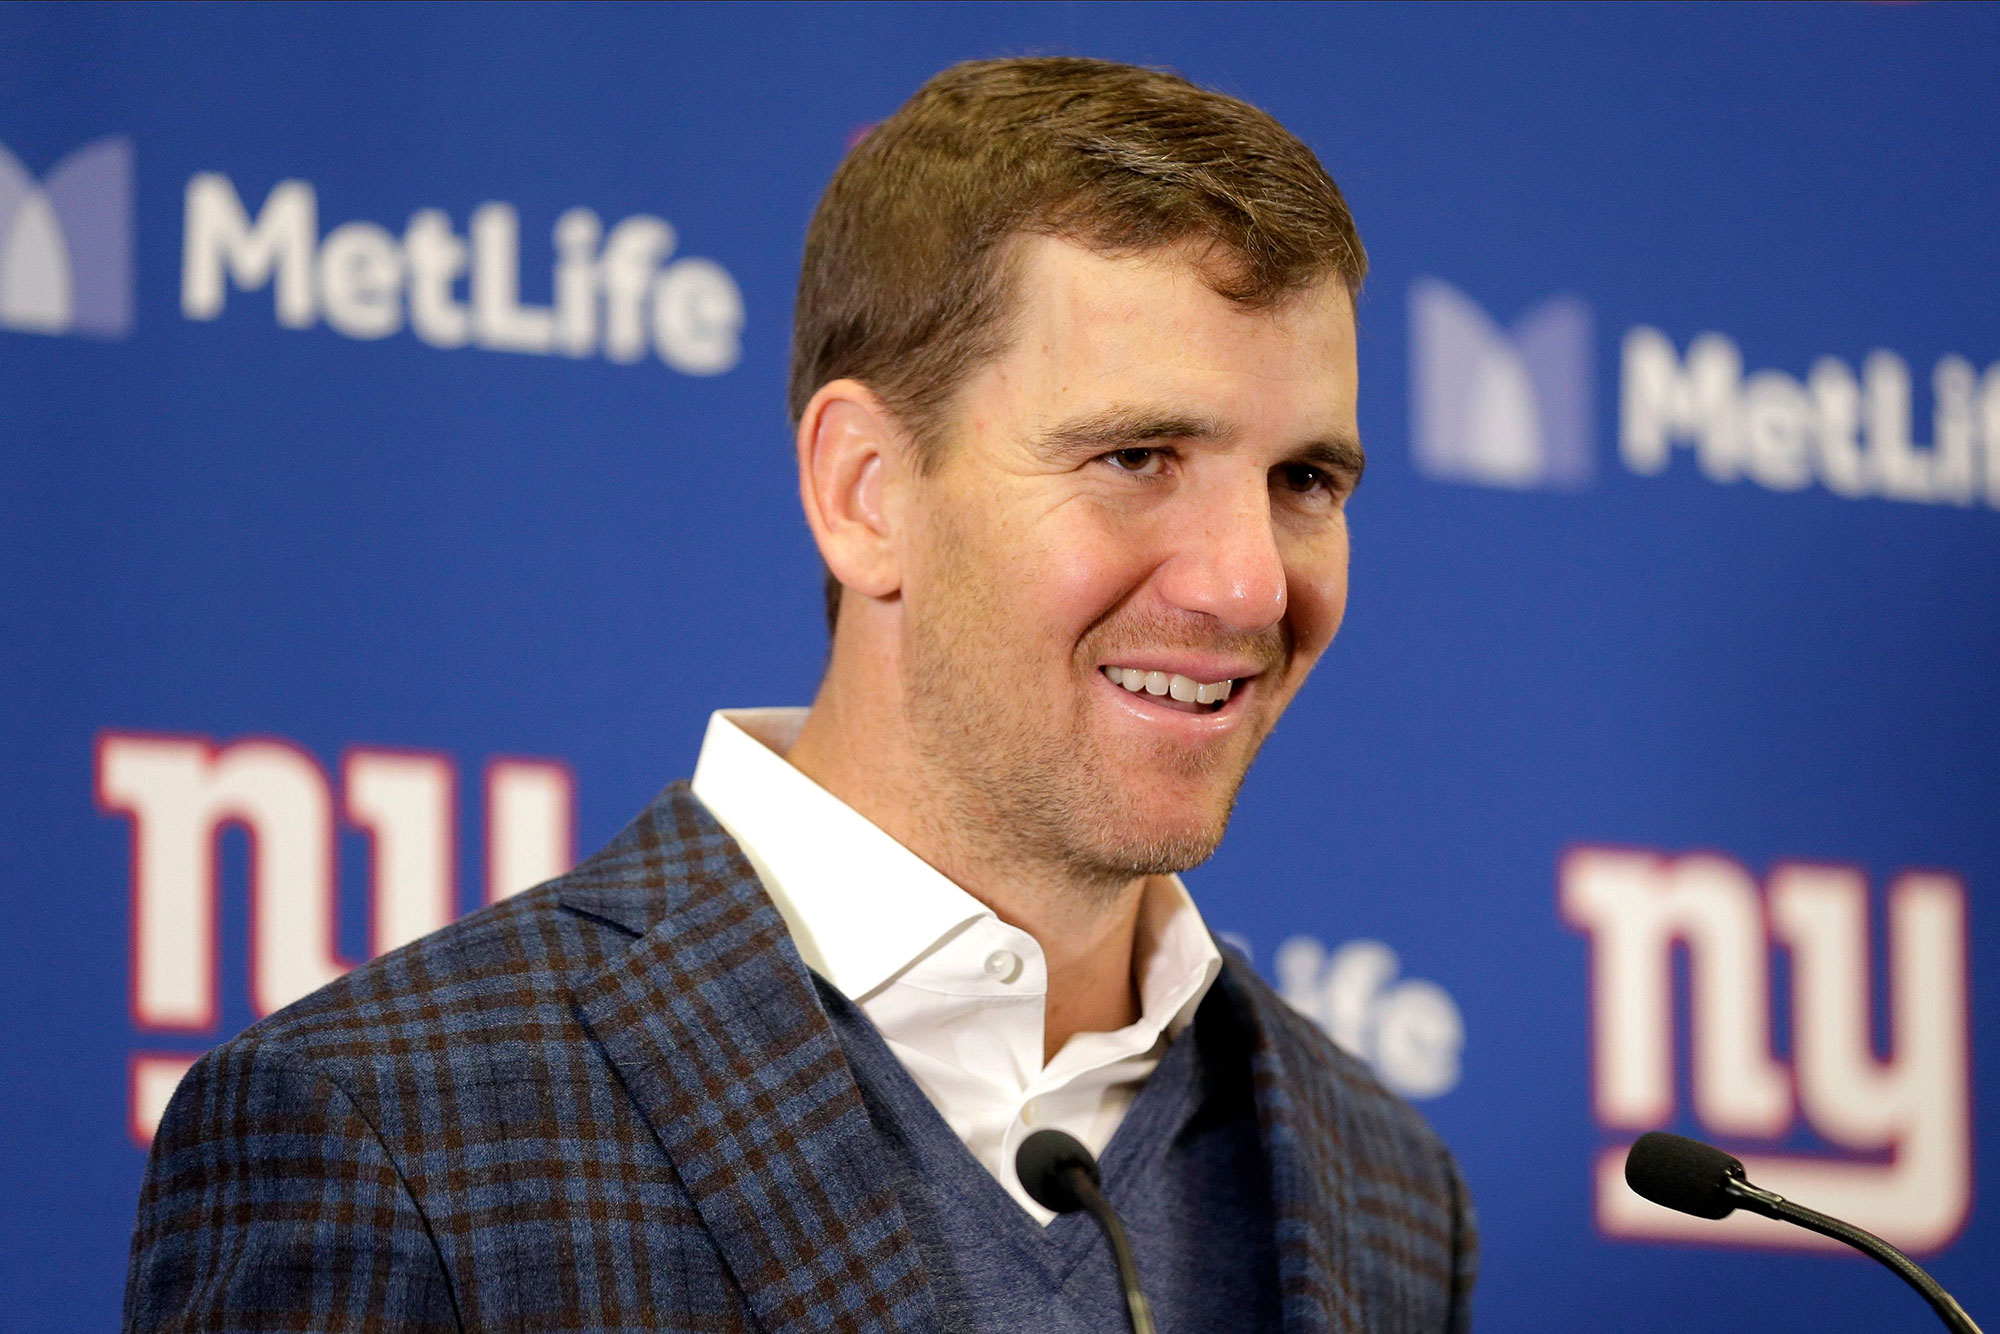 Giants QB Eli Manning quietly on pace for career-year in the red zone, PFF  News & Analysis